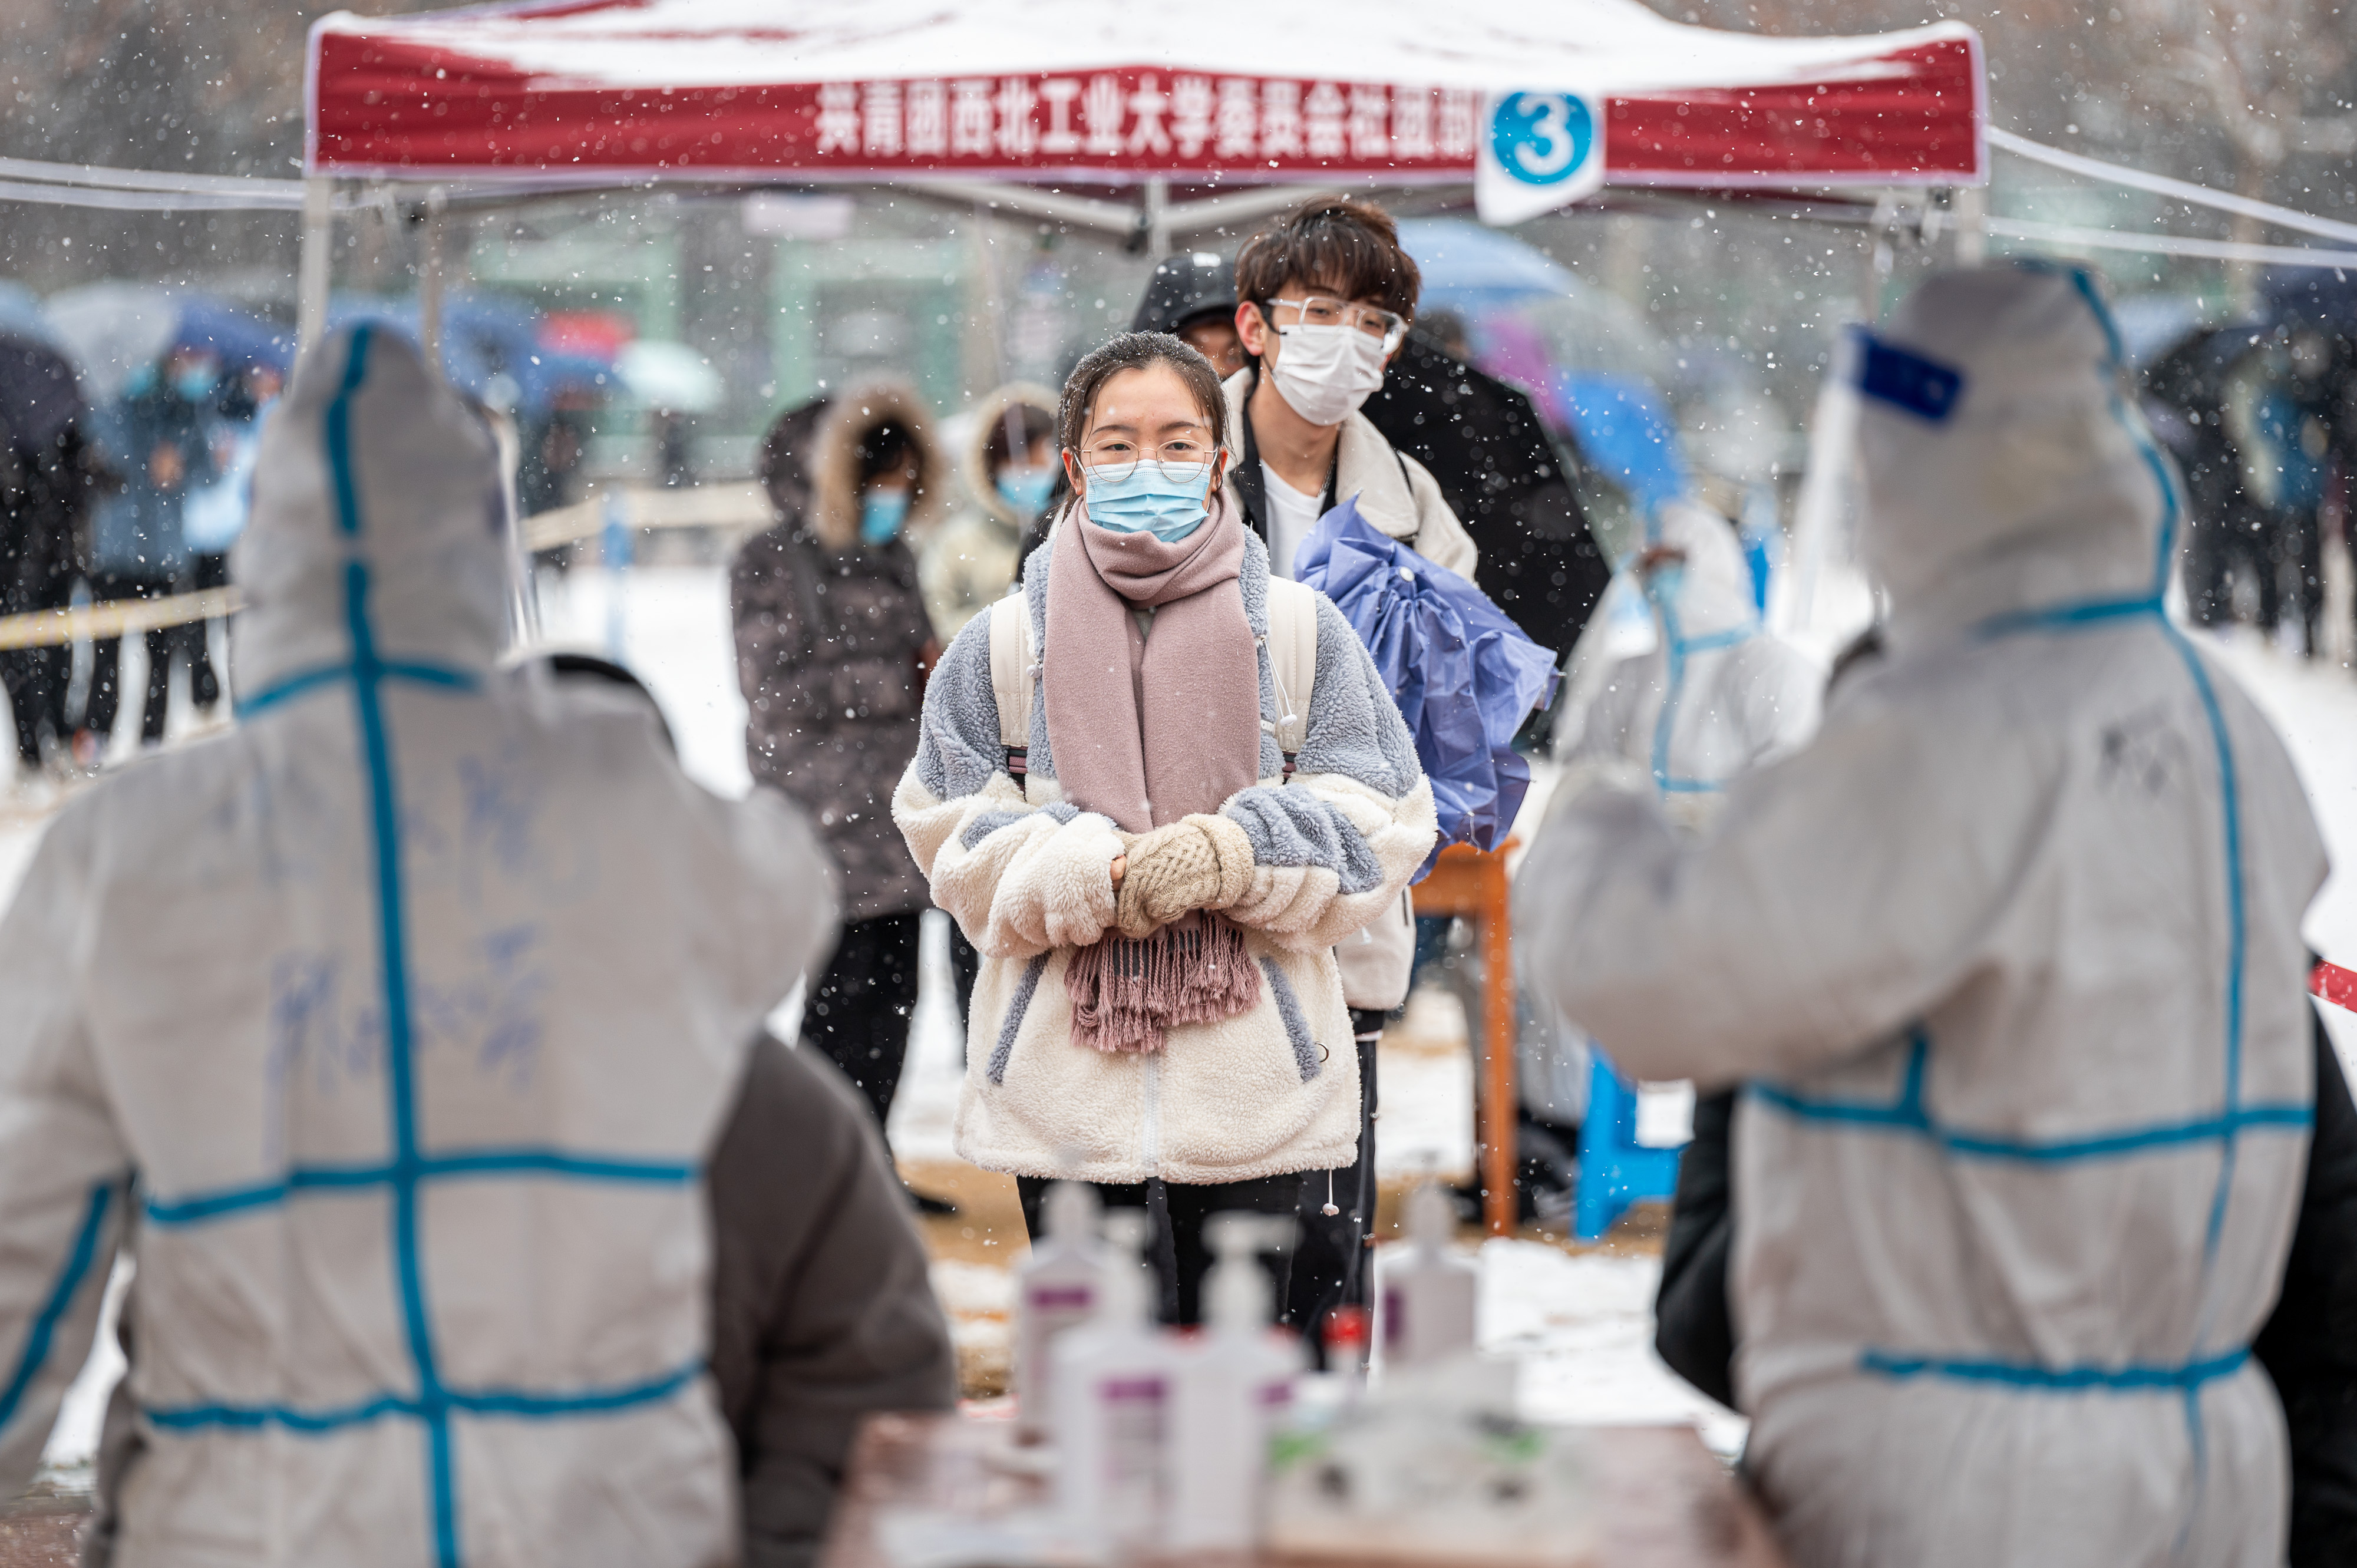 Students and teachers queue up for COVID-19 nucleic acid testing at Northwestern Polytechnical University during a snowfall on December 25 2021 in Xi an, Shaanxi Province of China. 